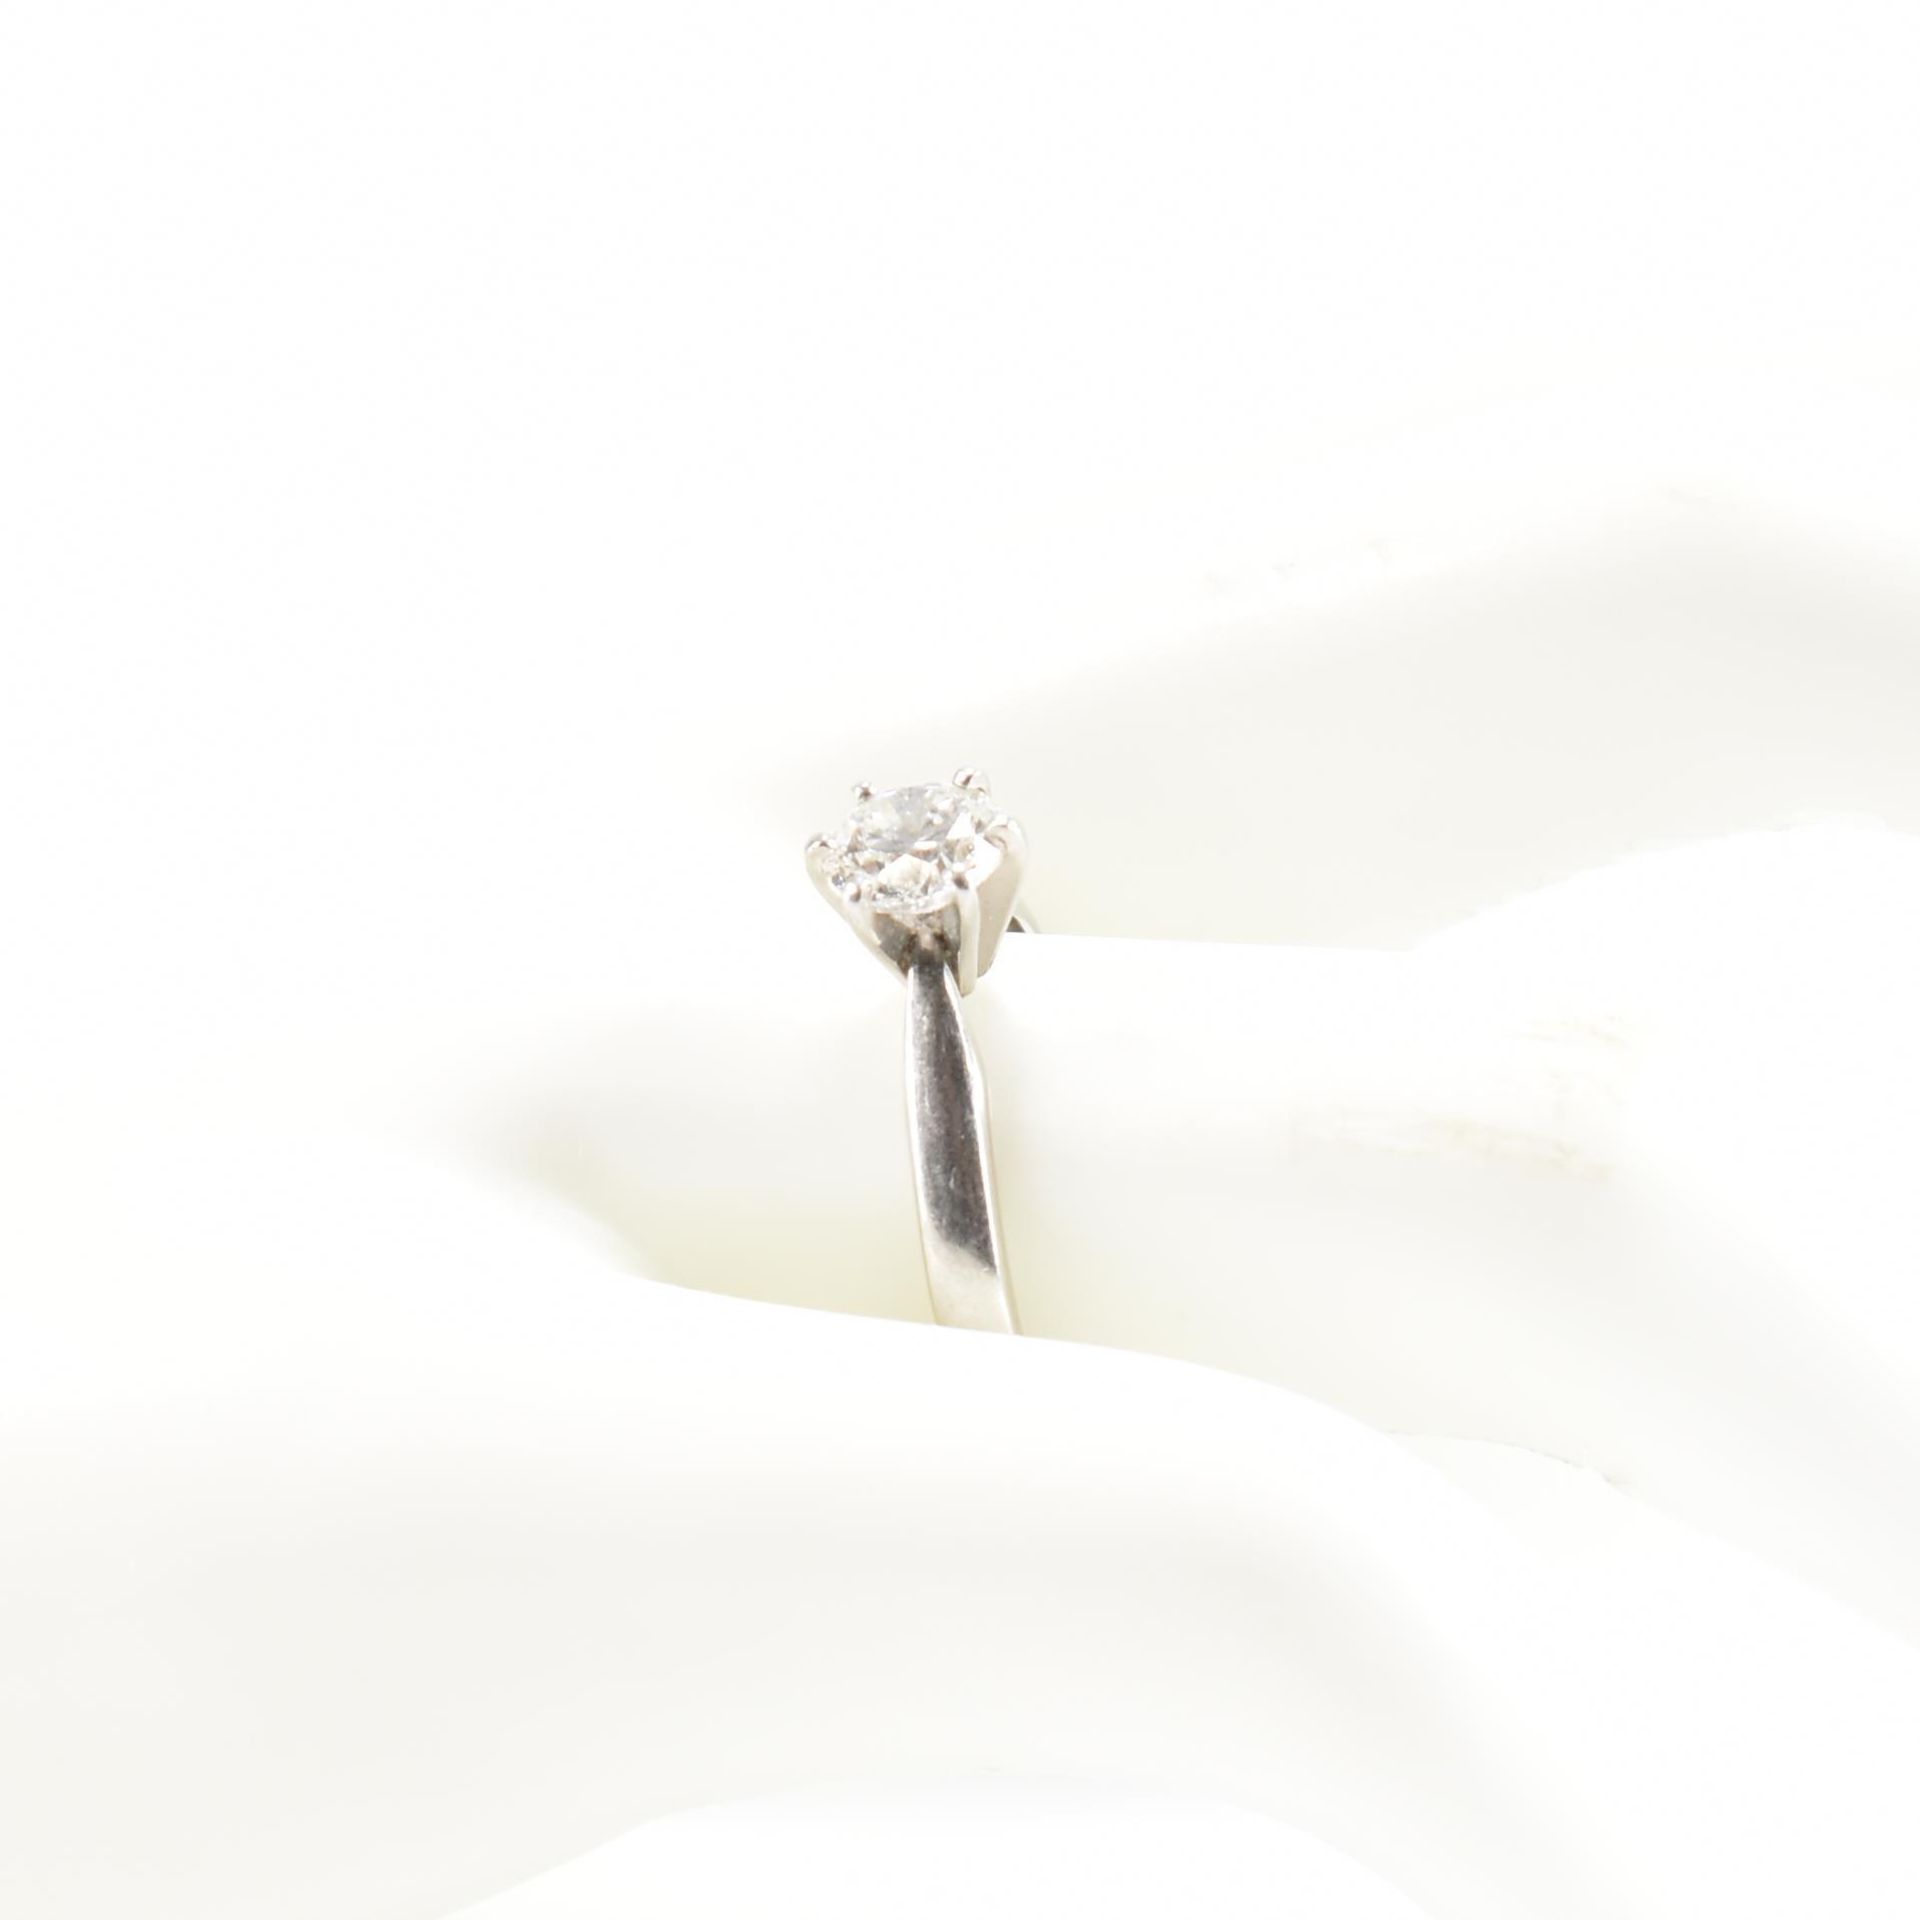 1CT DIAMOND SOLITAIRE RING WITH GIA REPORT - Image 8 of 10